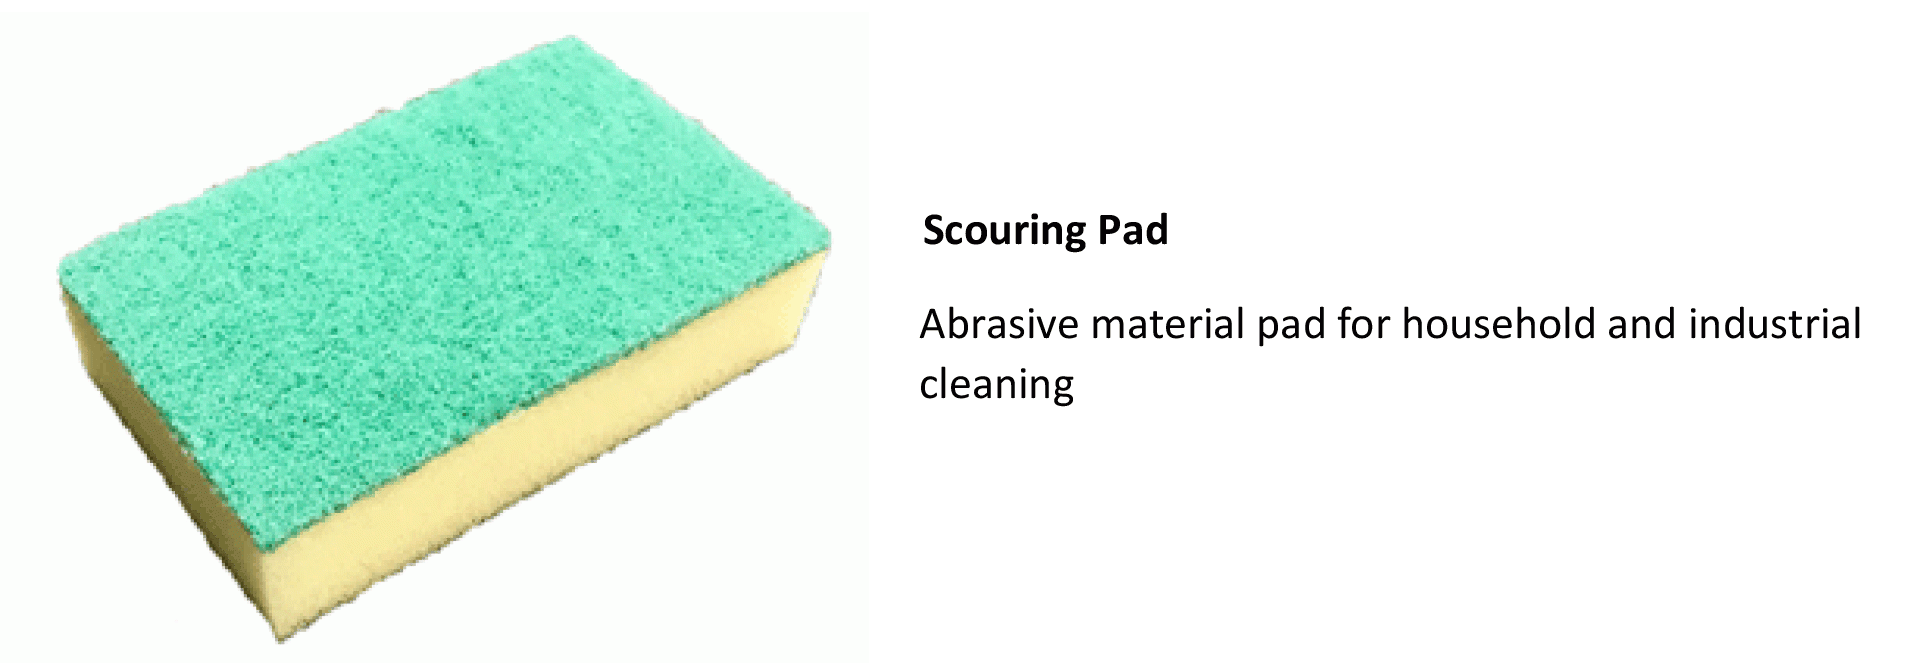 Scouring-pad-info-to-upload.gif#asset:92